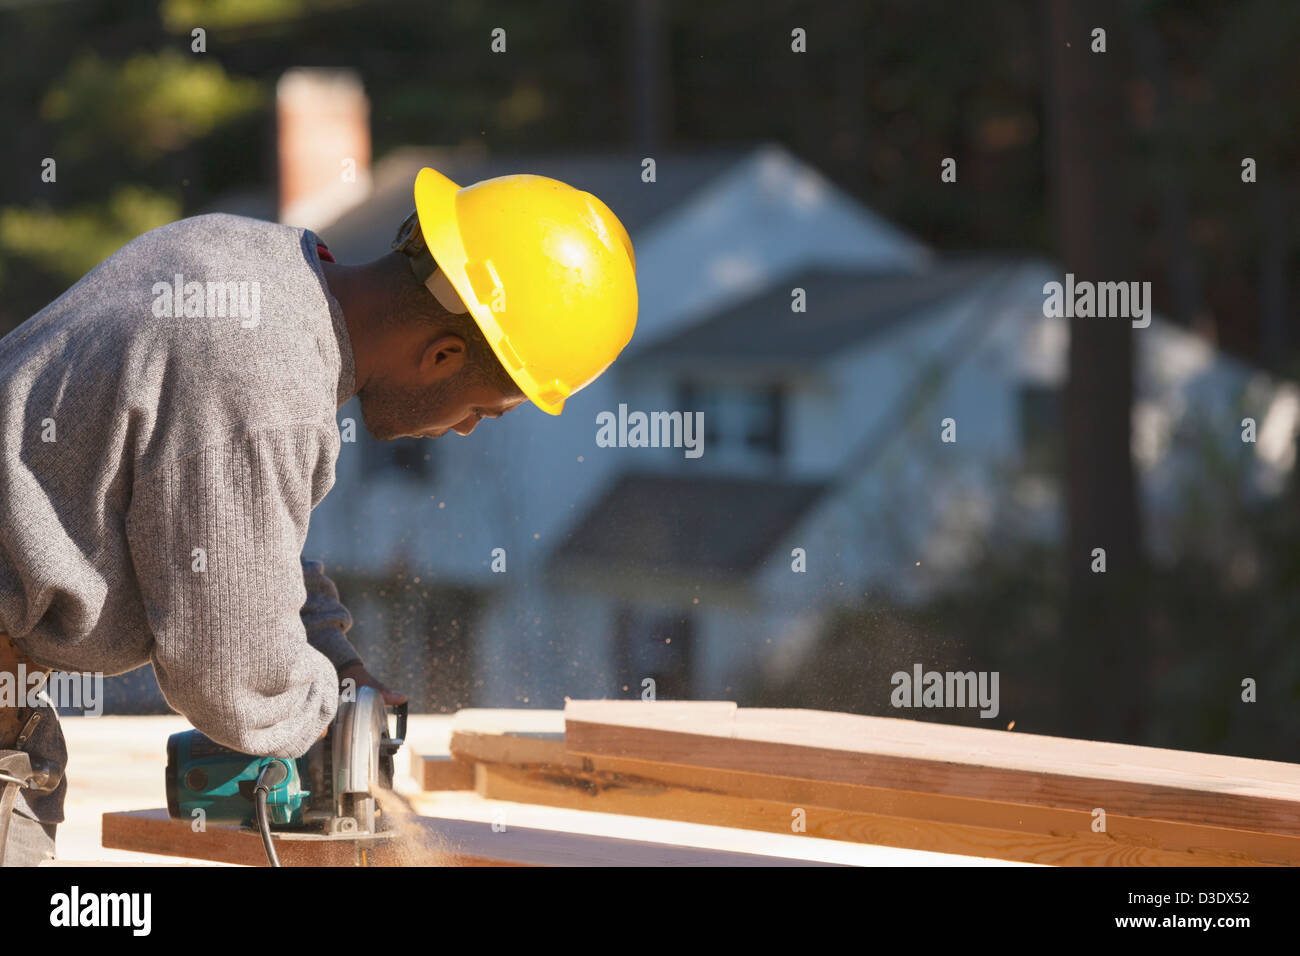 Carpenter cutting bevel on rafter with a circular saw Stock Photo